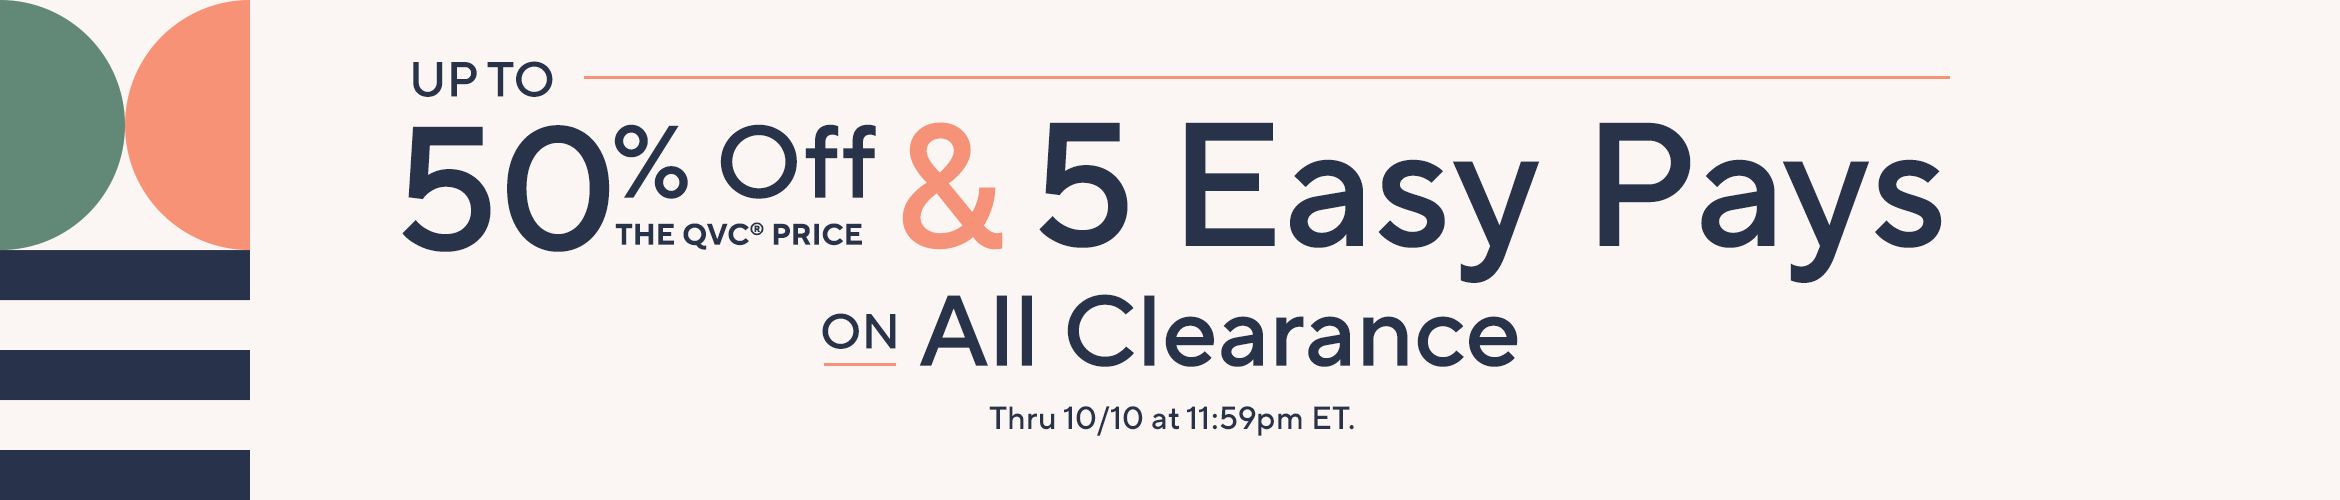 Up to 50% Off the QVC® Price & 5 Easy Pays on All Clearance Thru 10/10 at 11:59pm ET.